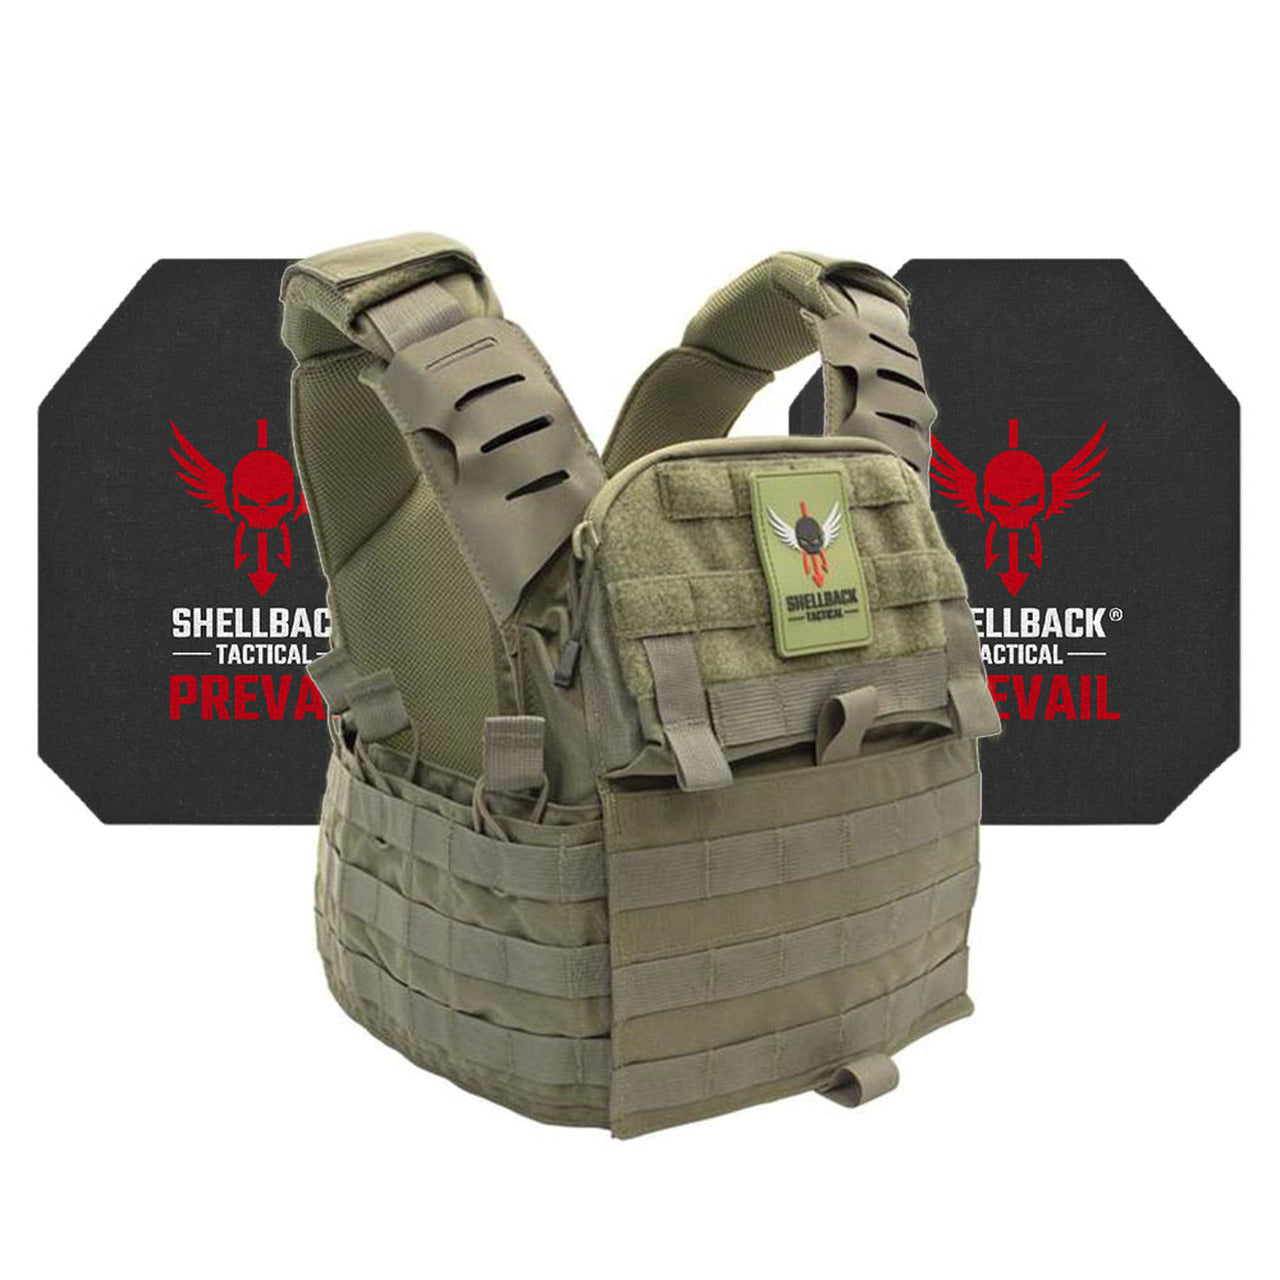 A Shellback Tactical Banshee Elite 2.0 Active Shooter Kit with Level IV Model 4S17 Armor Plates plate carrier with the shieldblack logo on it.